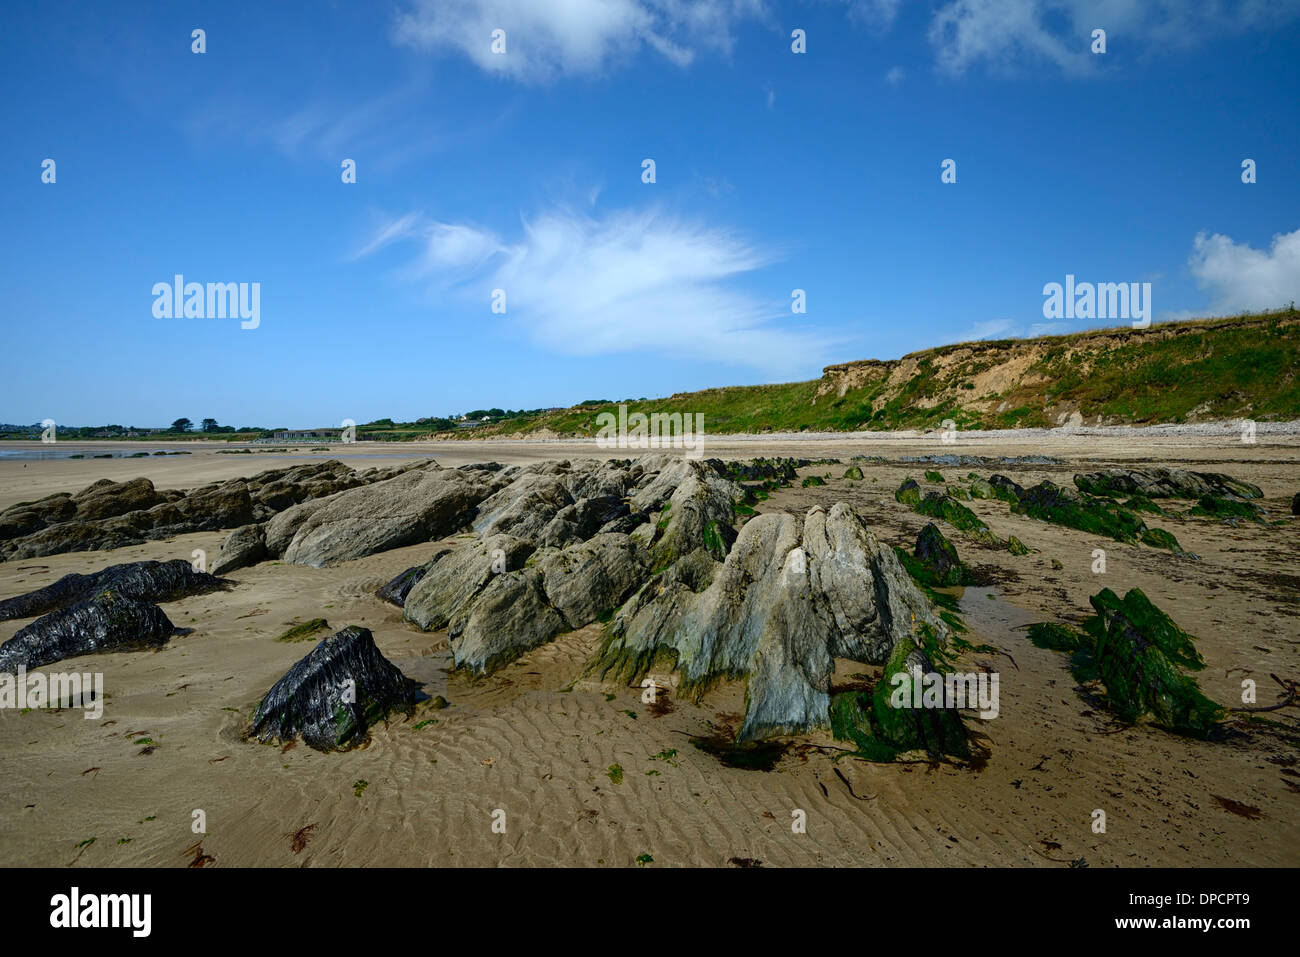 Ardmore Waterford Ireland High Resolution Stock Photography And Images Alamy